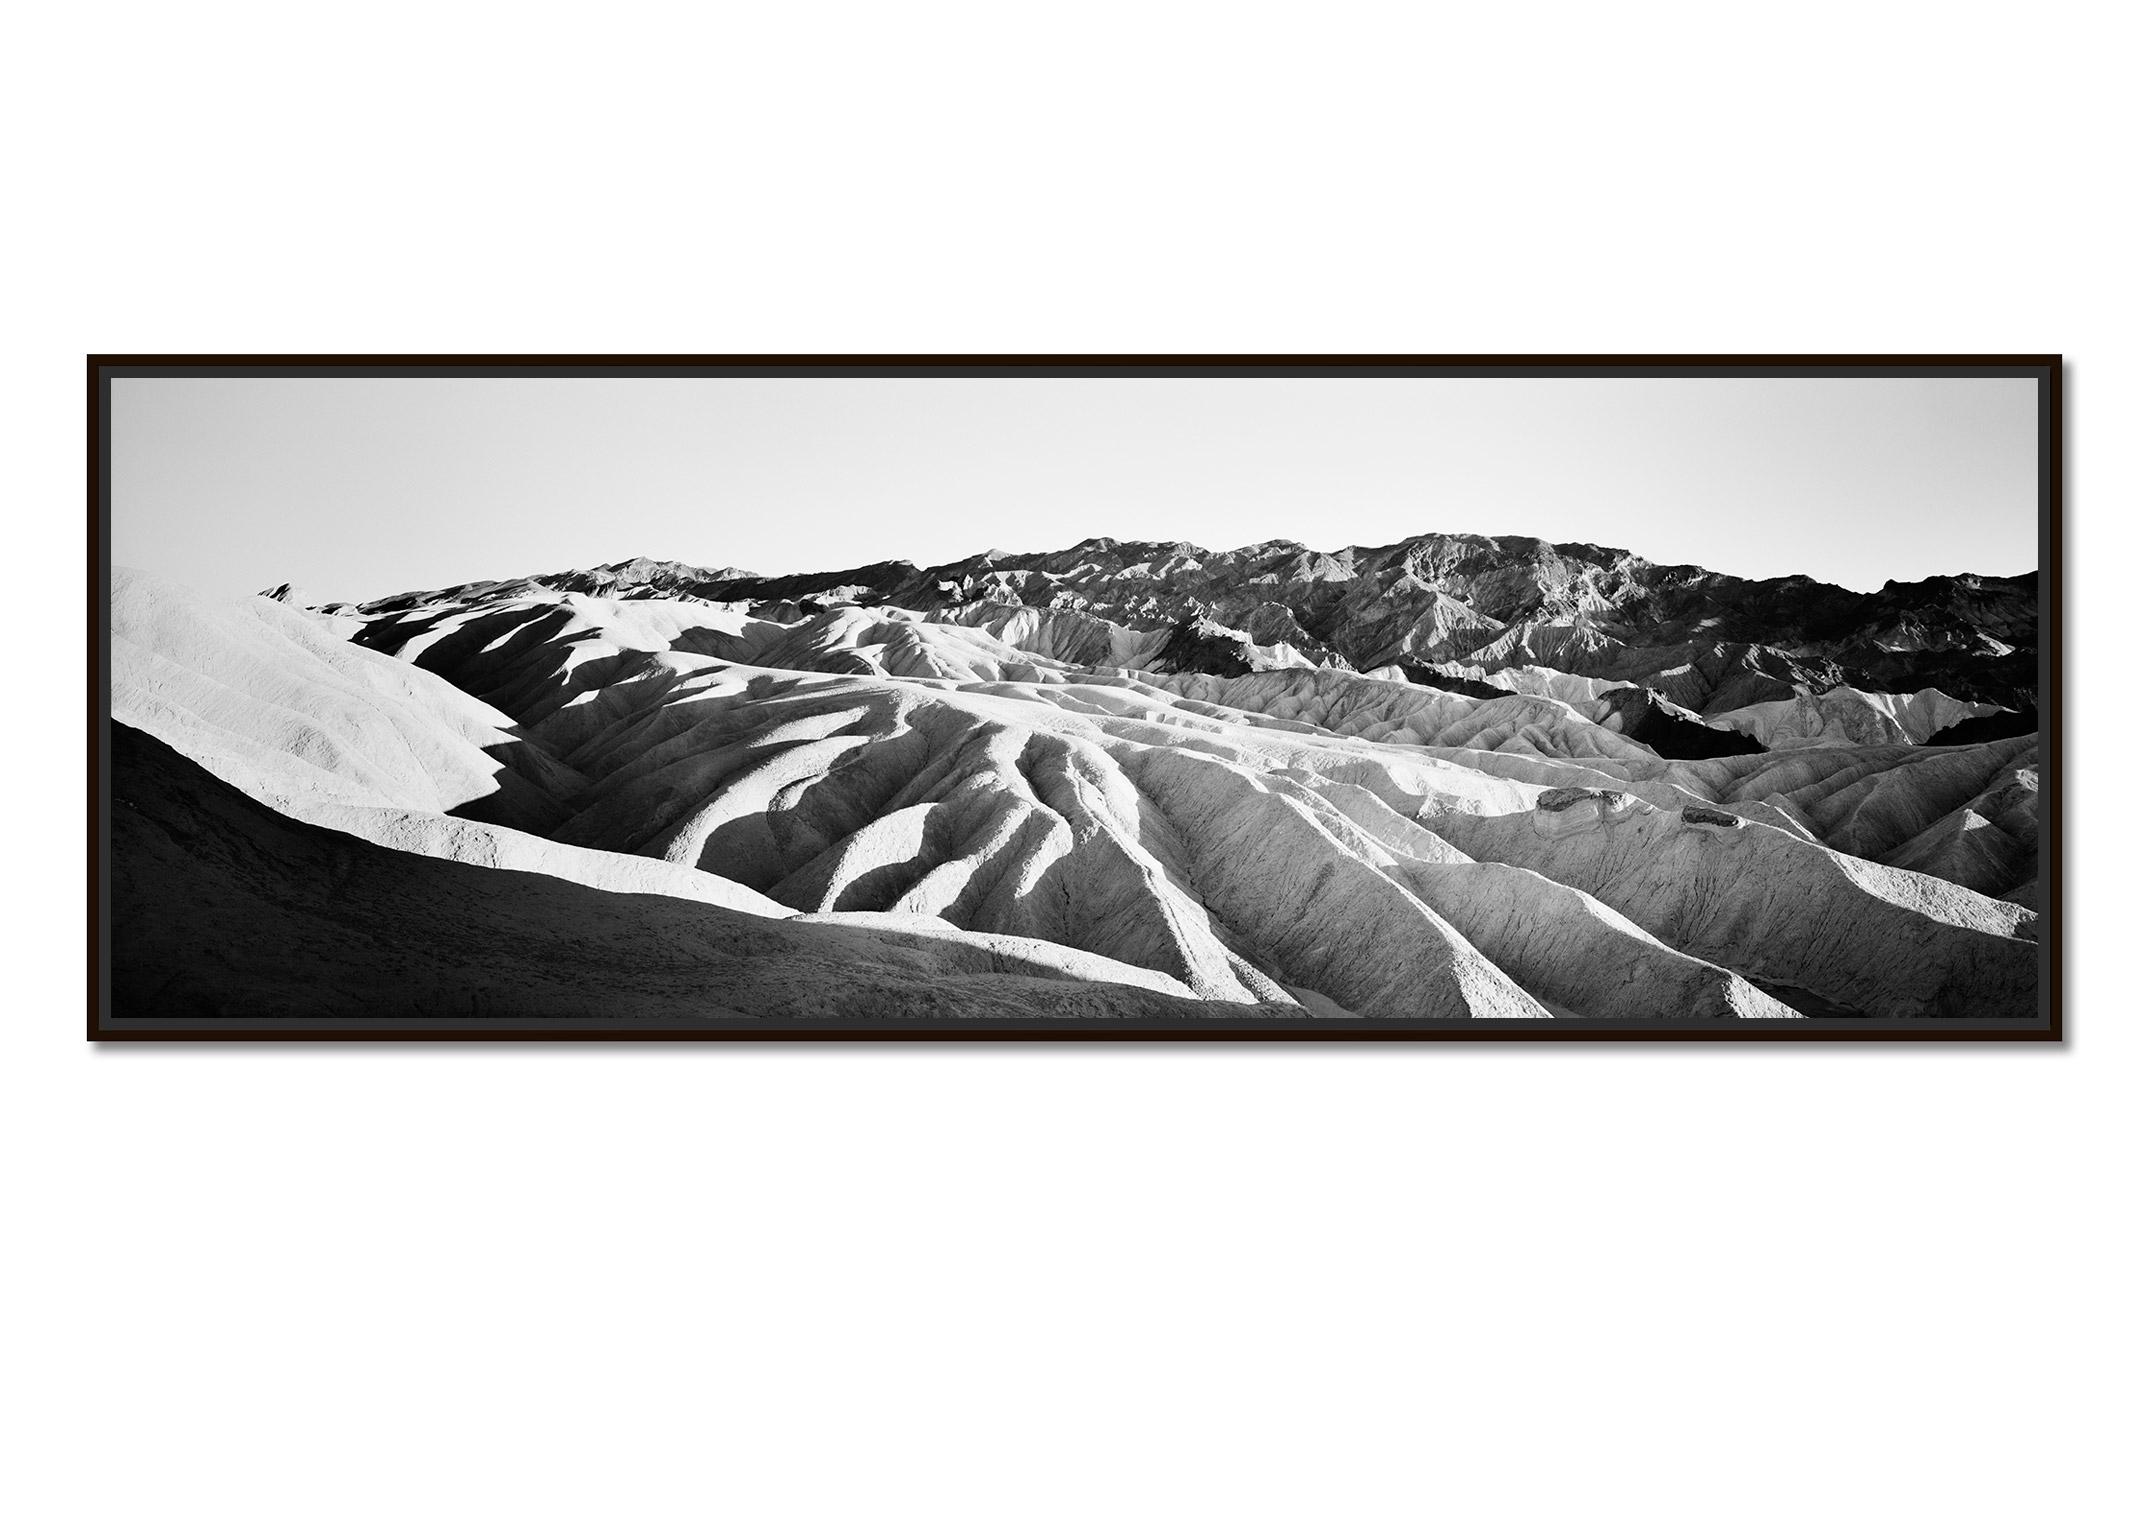 Shadow Mountains Panorama, Death Valley, black and white photography, landscape - Photograph by Gerald Berghammer